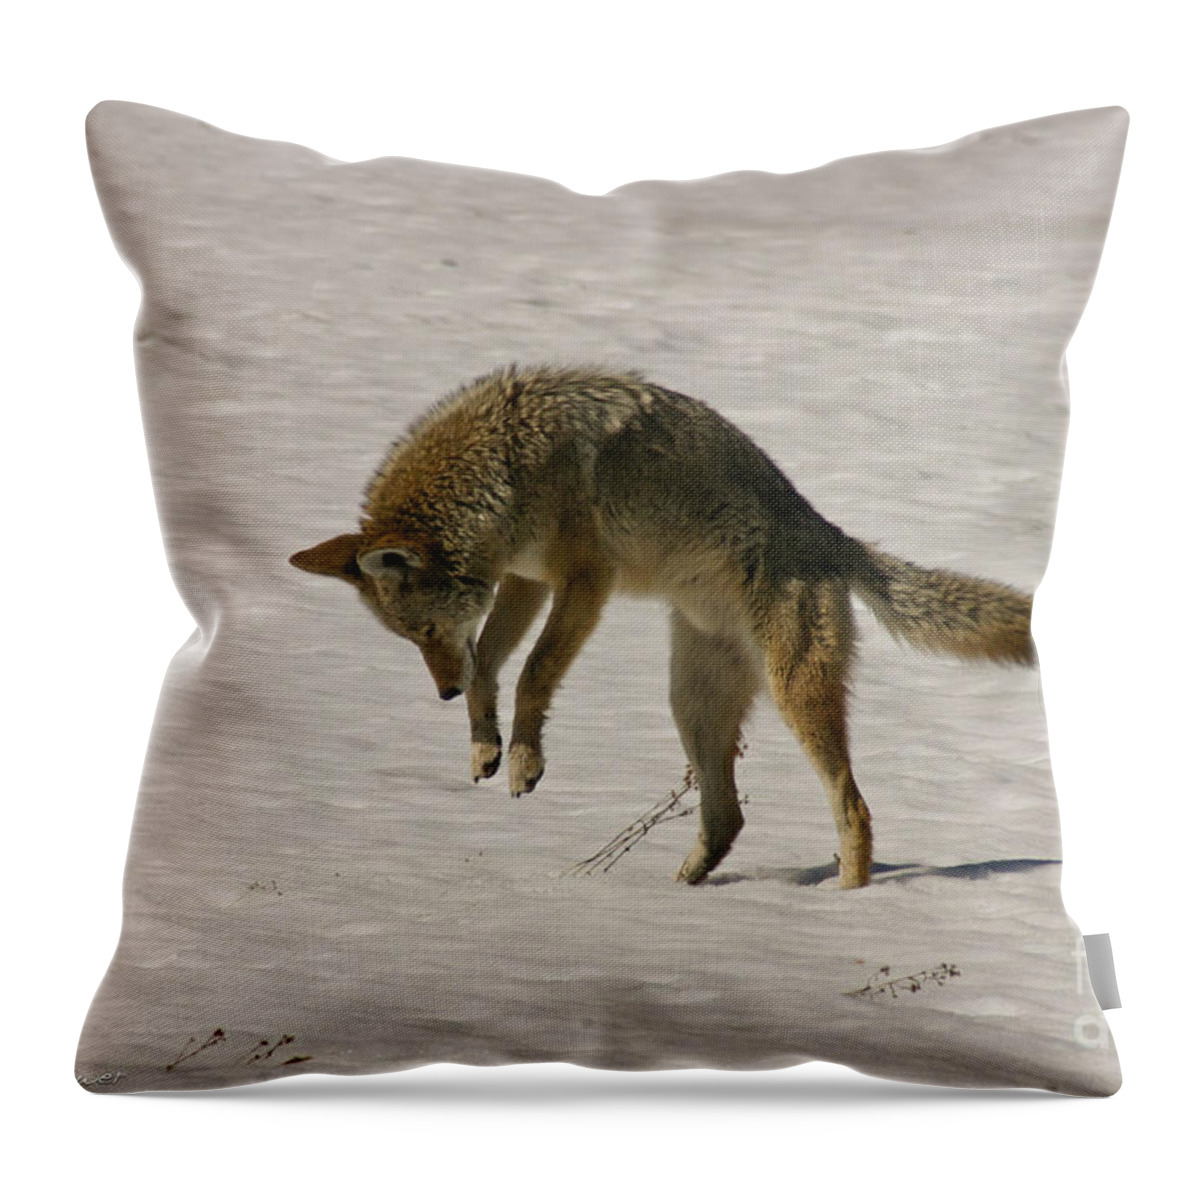 Pouncing Throw Pillow featuring the photograph Pouncing Coyote by Mitch Shindelbower